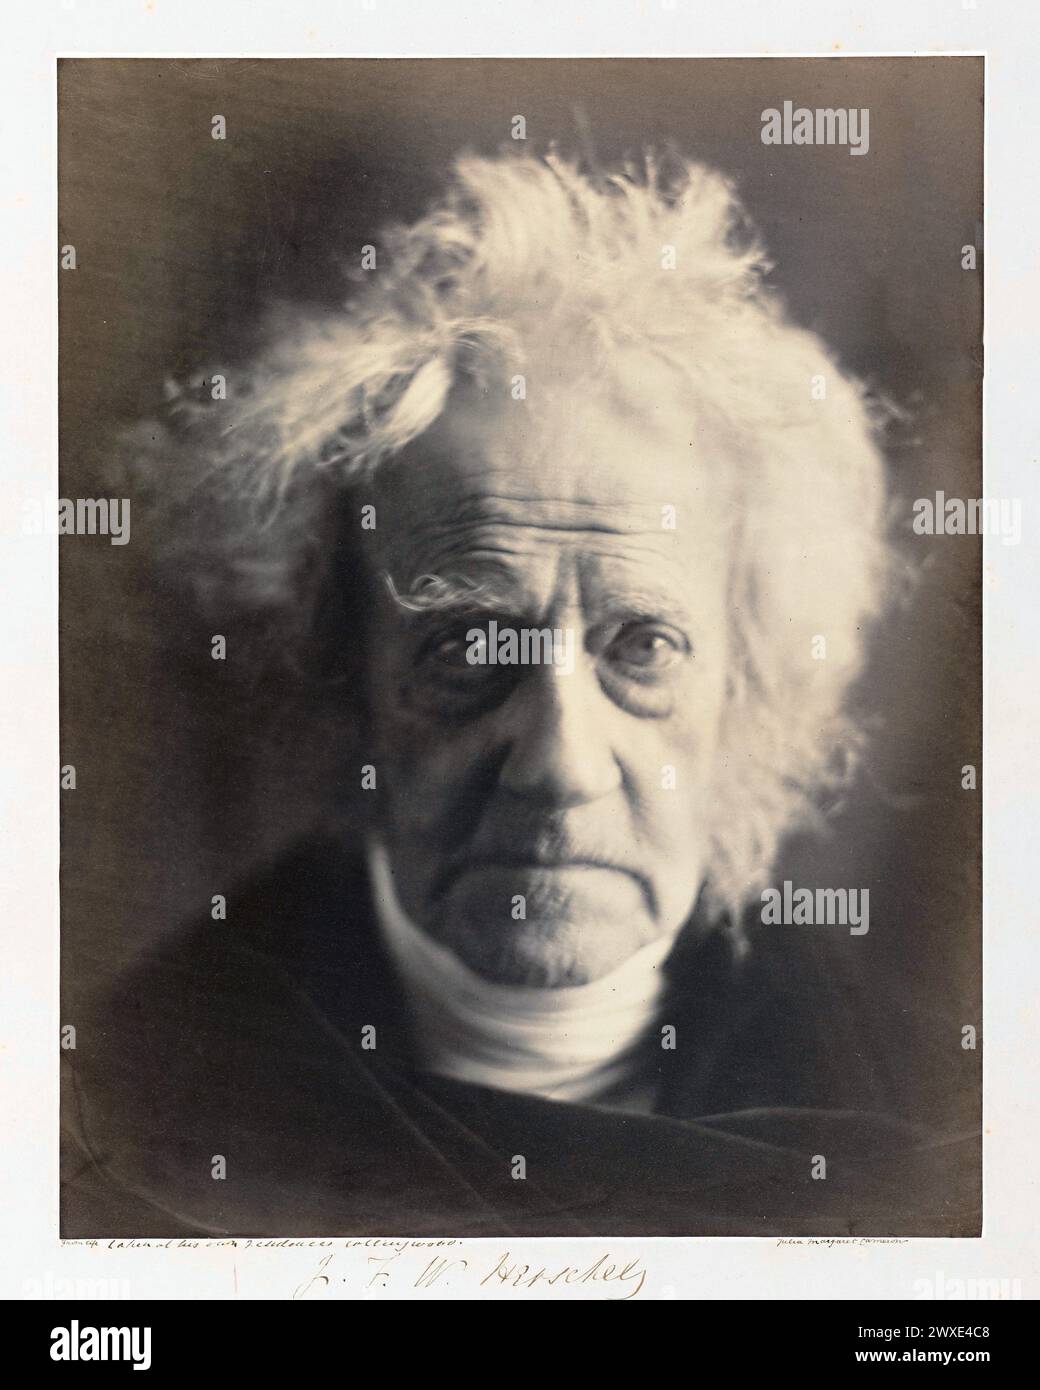 Portrait of the astronomer Sir John Herschel, photographed by Julia Margaret Cameron, 1867. Albumen print  Sir John Frederick William Herschel, 1st Baronet KH FRS was an English polymath active as a mathematician, astronomer, chemist, inventor, and experimental photographer who invented the blueprint and did botanical work. Herschel originated the use of the Julian day system in astronomy Stock Photo